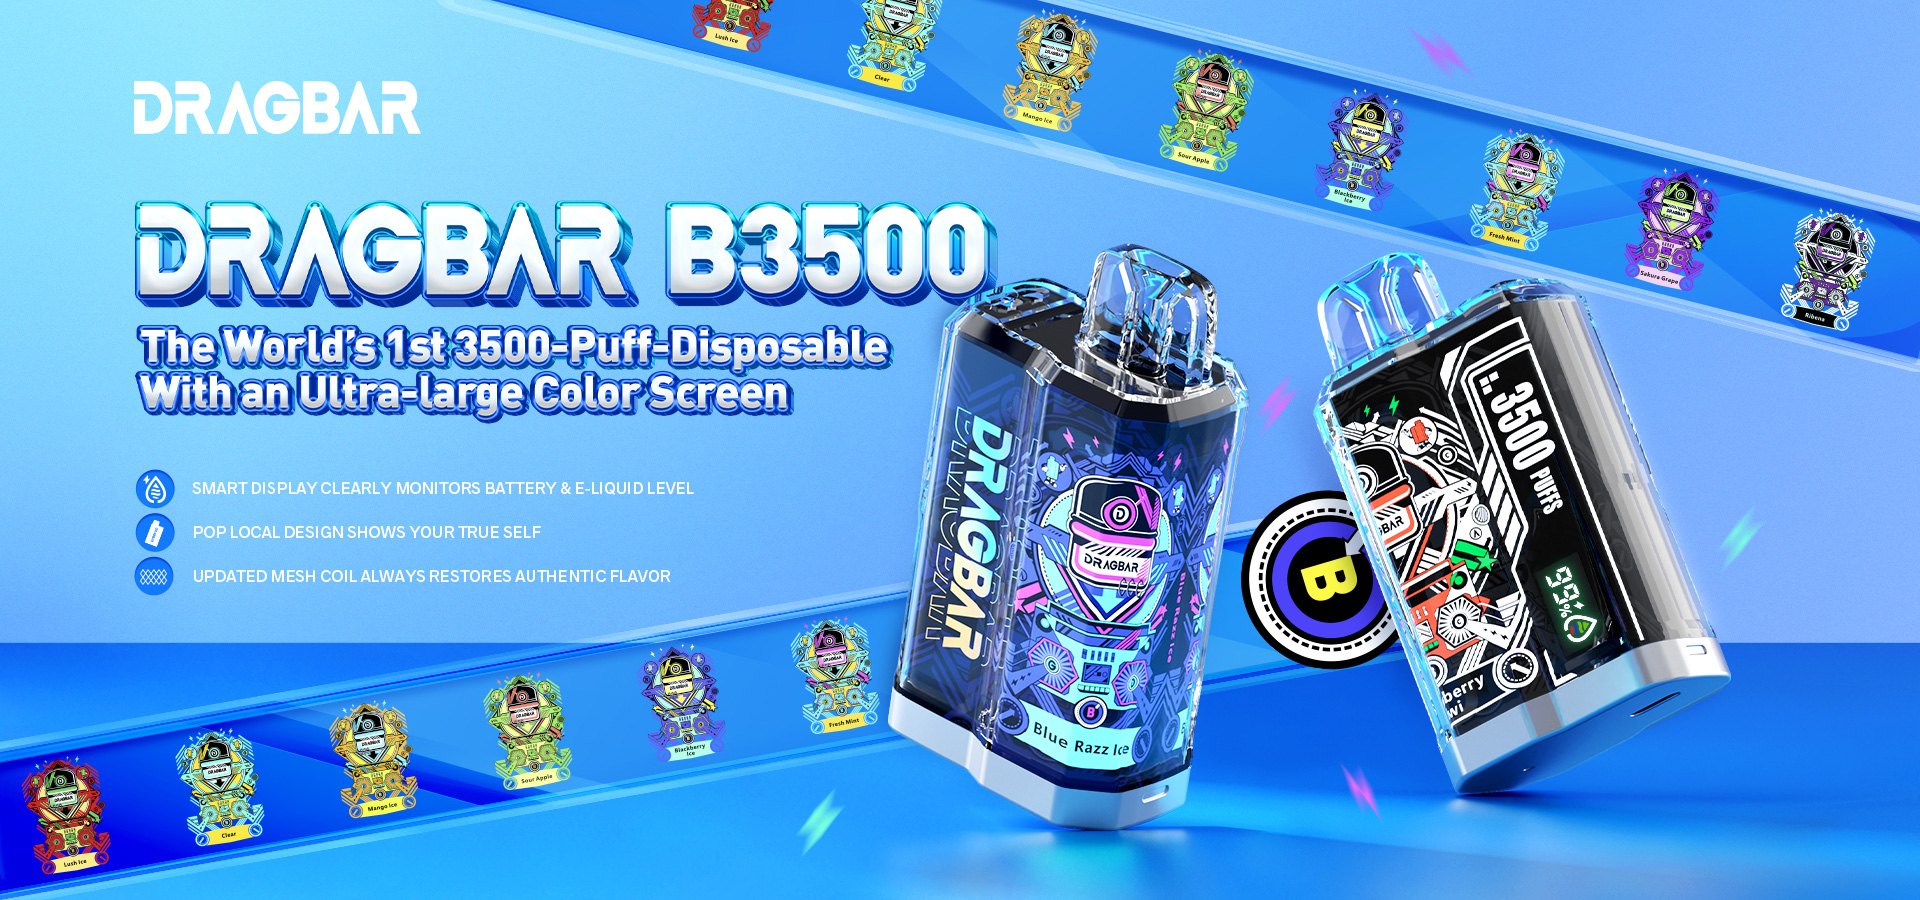 World’s First 3500-Puff-Disposable With an Ultra-large Color Screen DRAGBAR B3500 is newly launched in the US插图